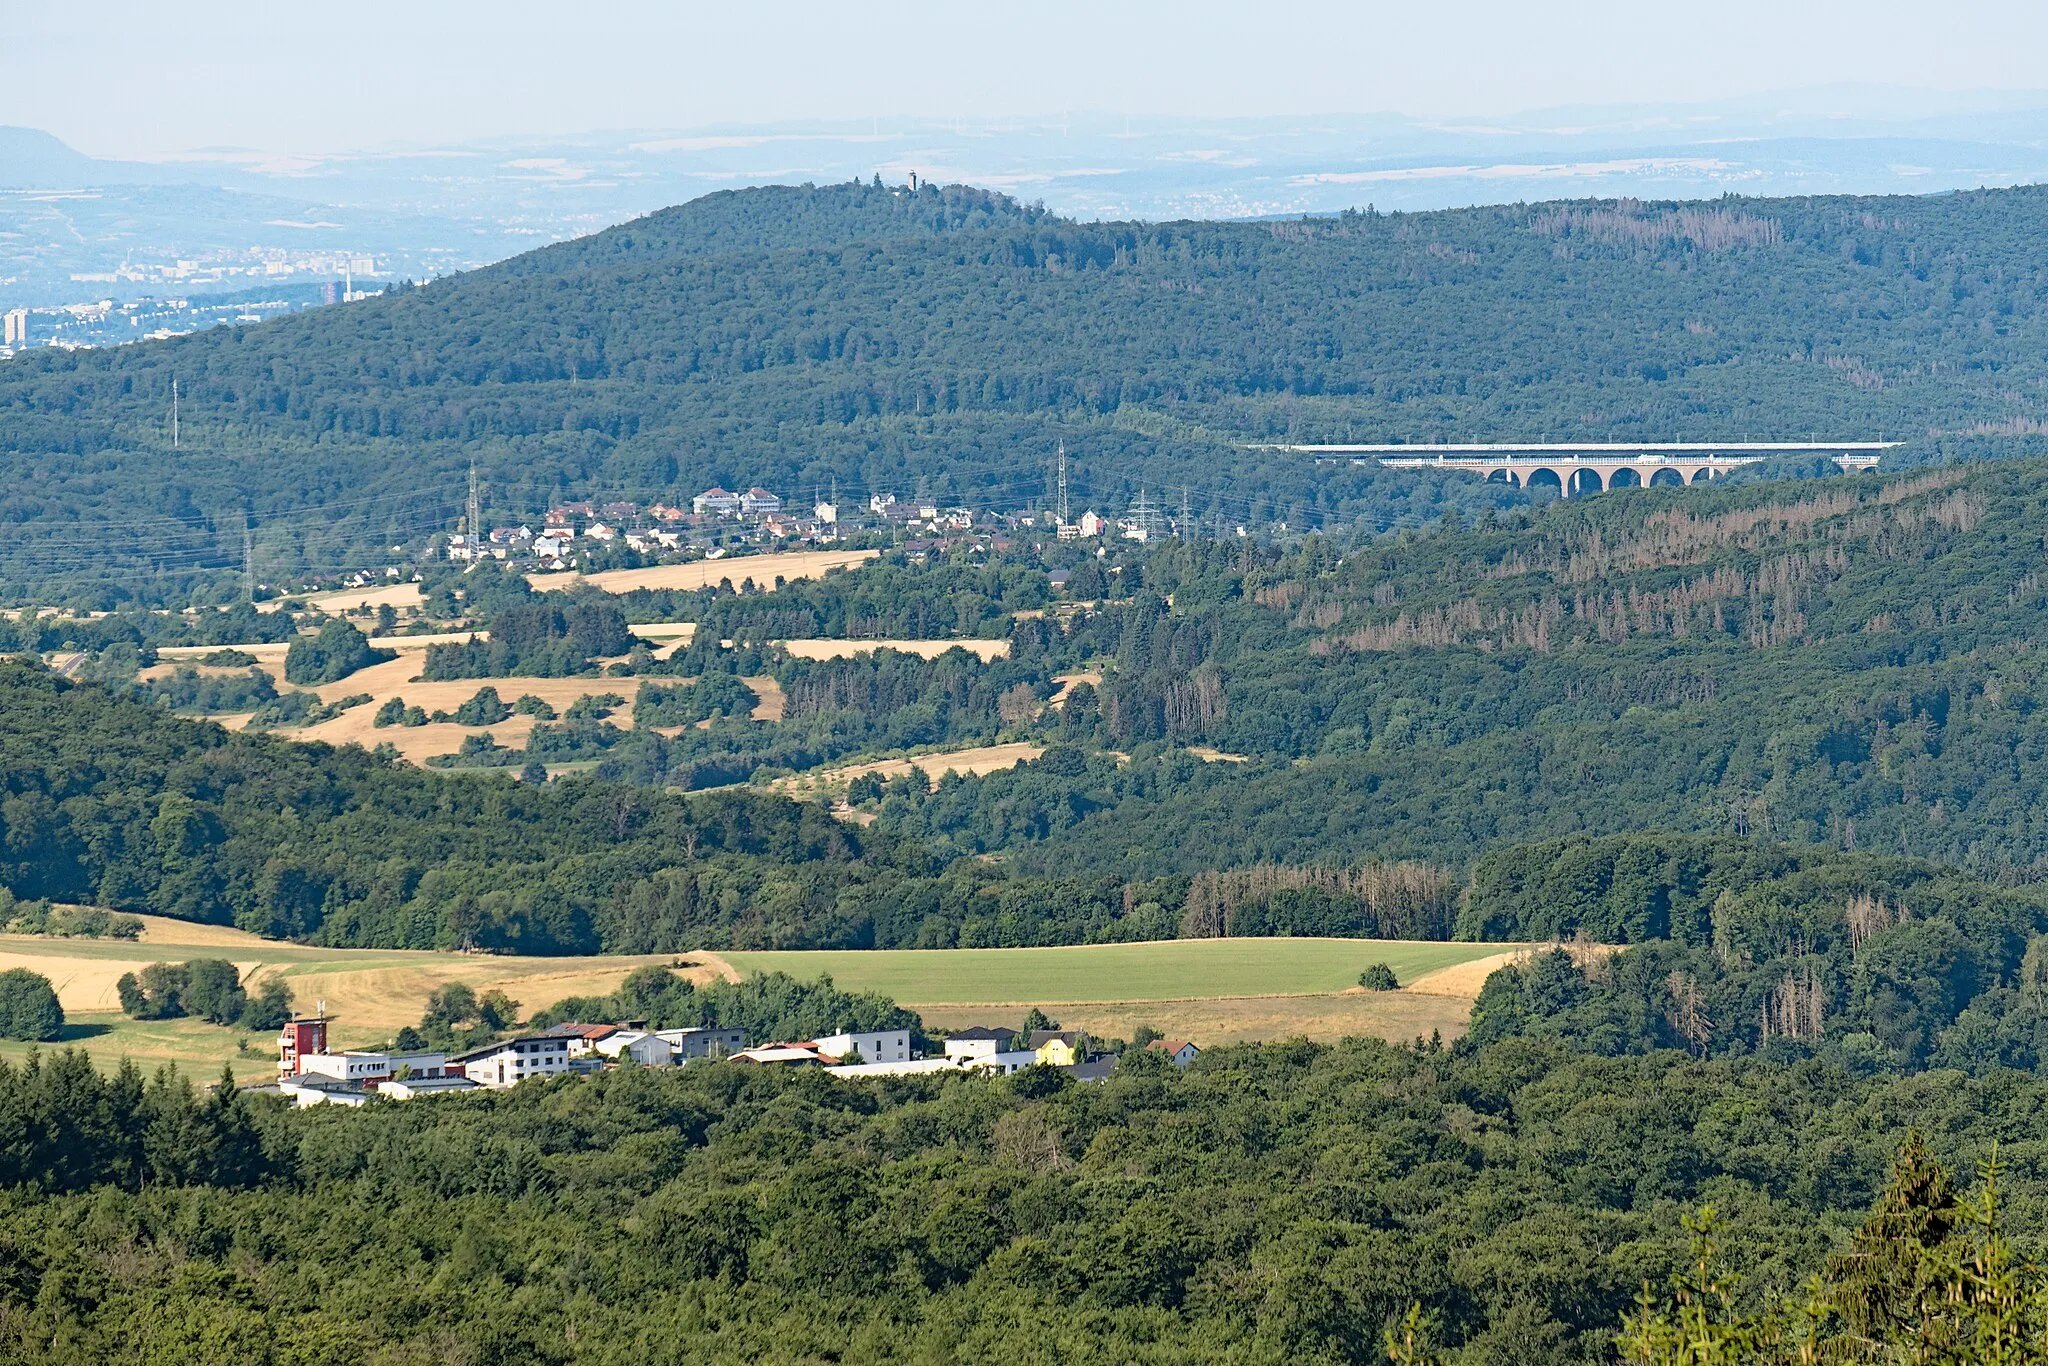 Photo showing: View from the mountain Glaskopf over the commercial park of Schlossborn on the southern part of Niederhausen as well as the Theißtal bridges for the A3 motorway and (behind) the ICE high speed railway Köln-Rhein/Main. In background, in front of Wiesbaden and the Rhein-Main area, the mountain Kellersberg with lookout can be seen.